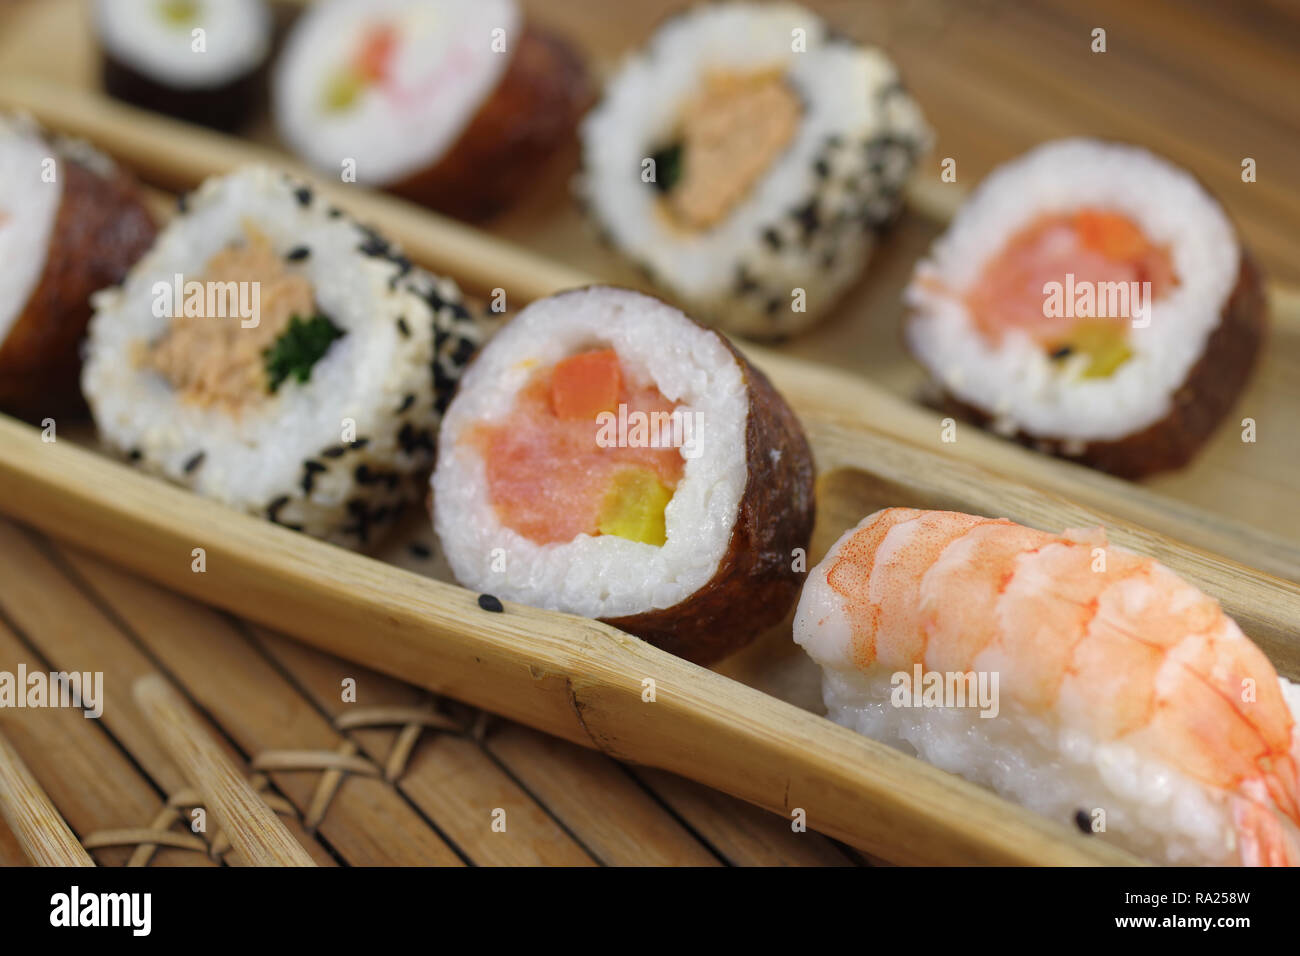 portion sushi and wooden hopsticks on plate Stock Photo